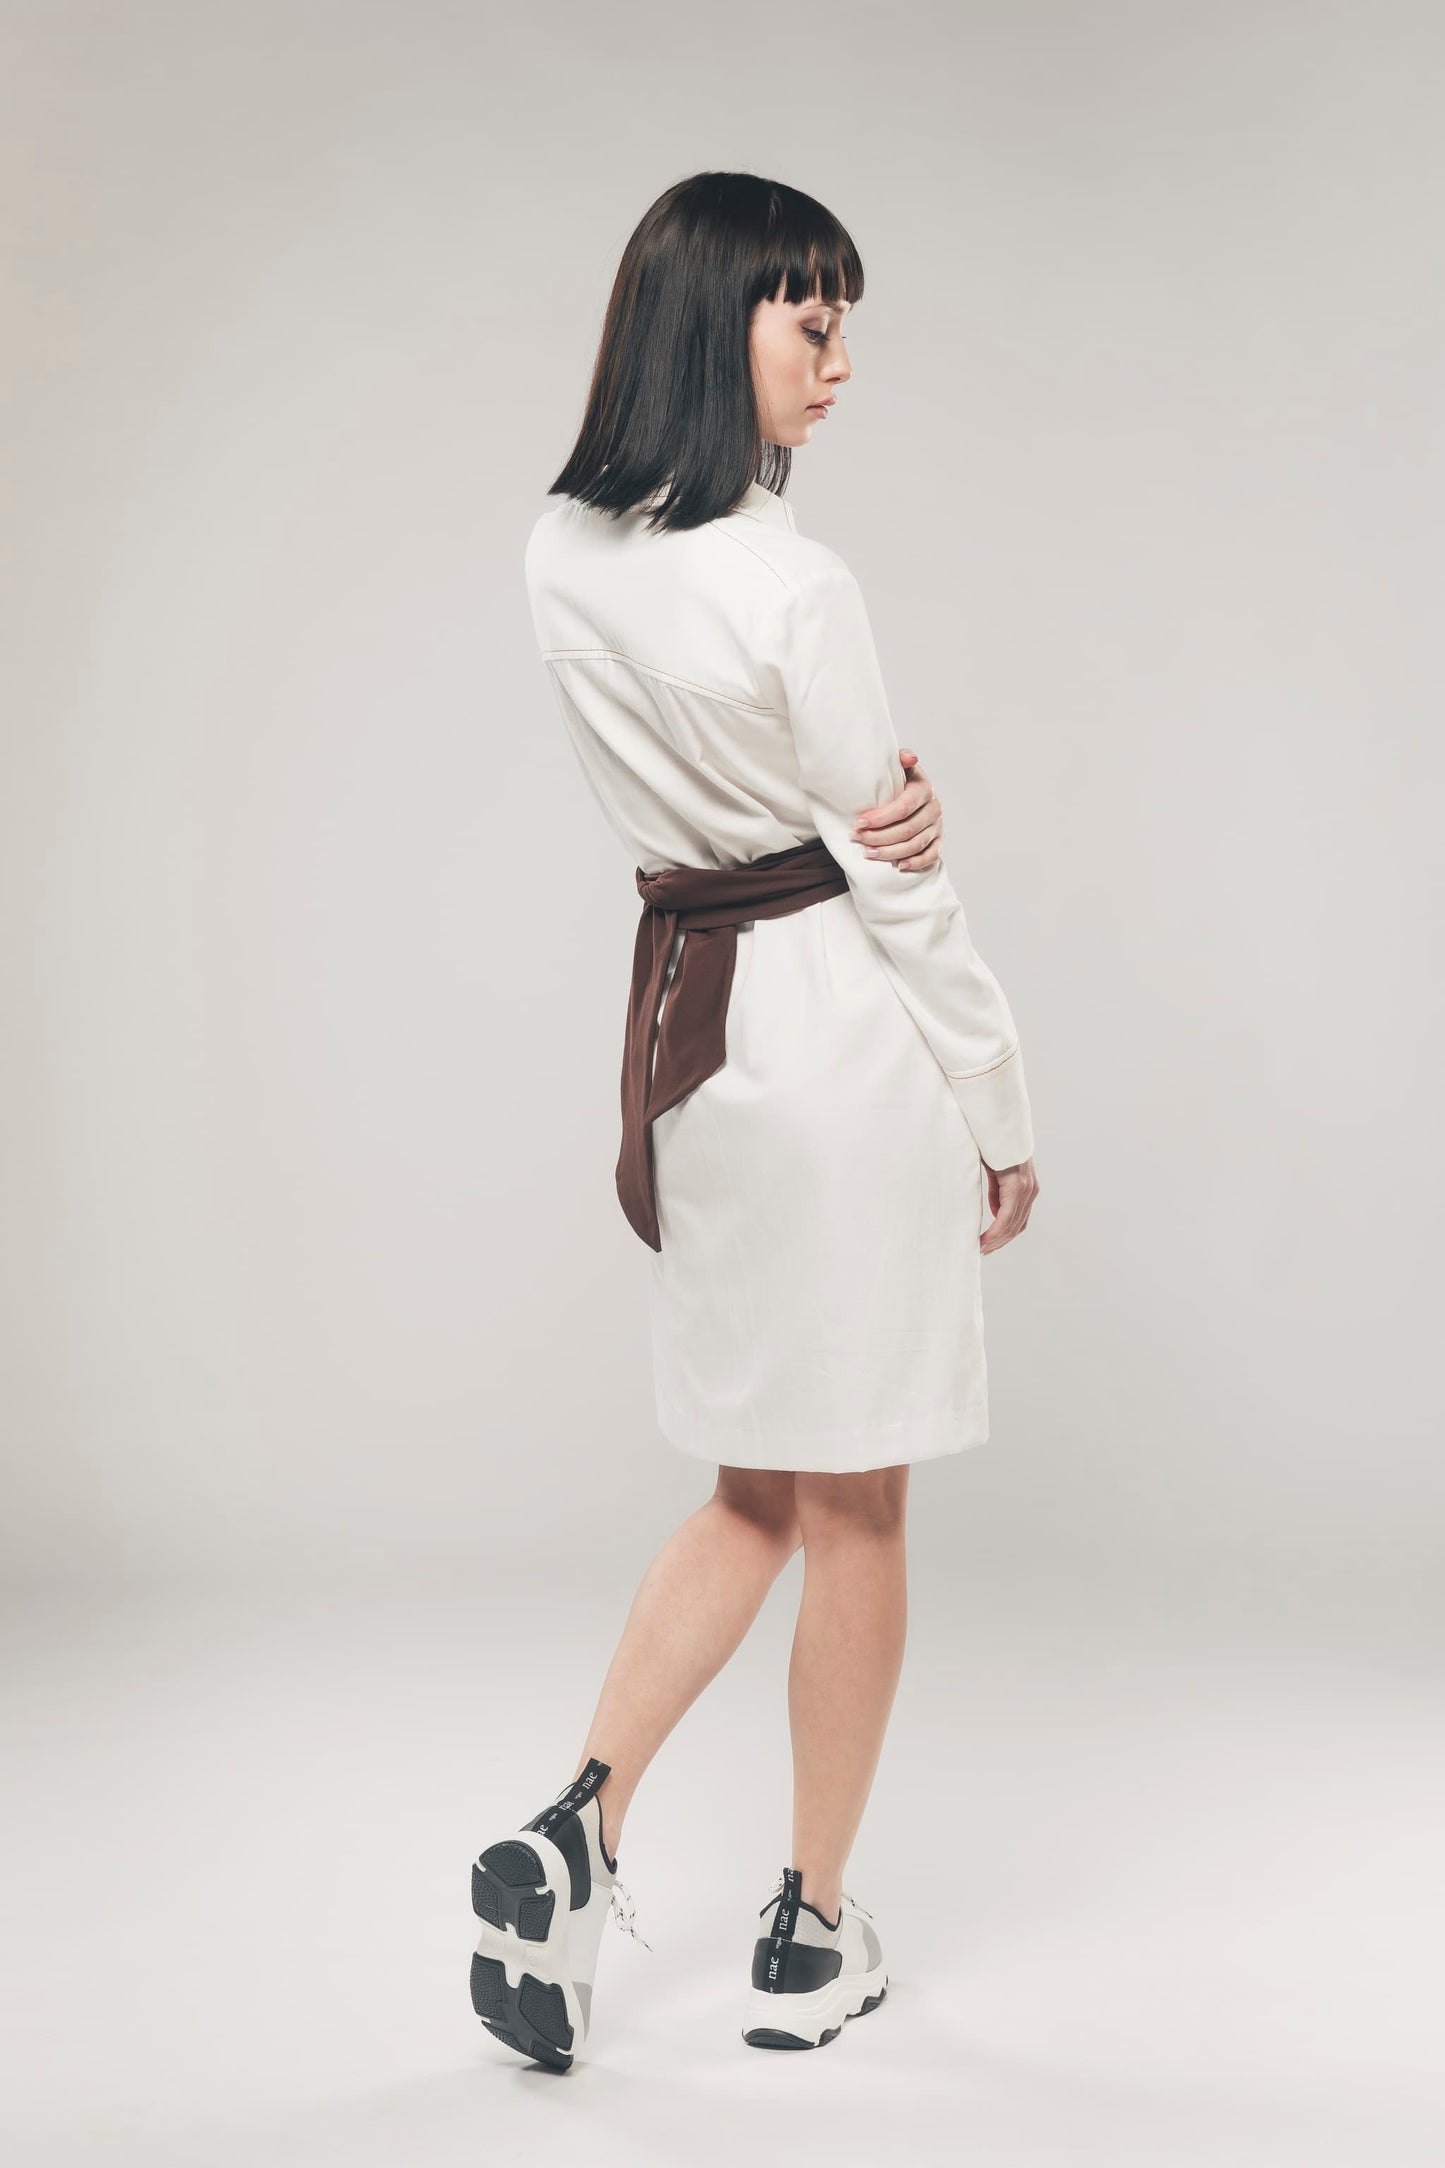 Image of back of white organic cotton shirt dress made by Organique, a sustainable clothing brand.